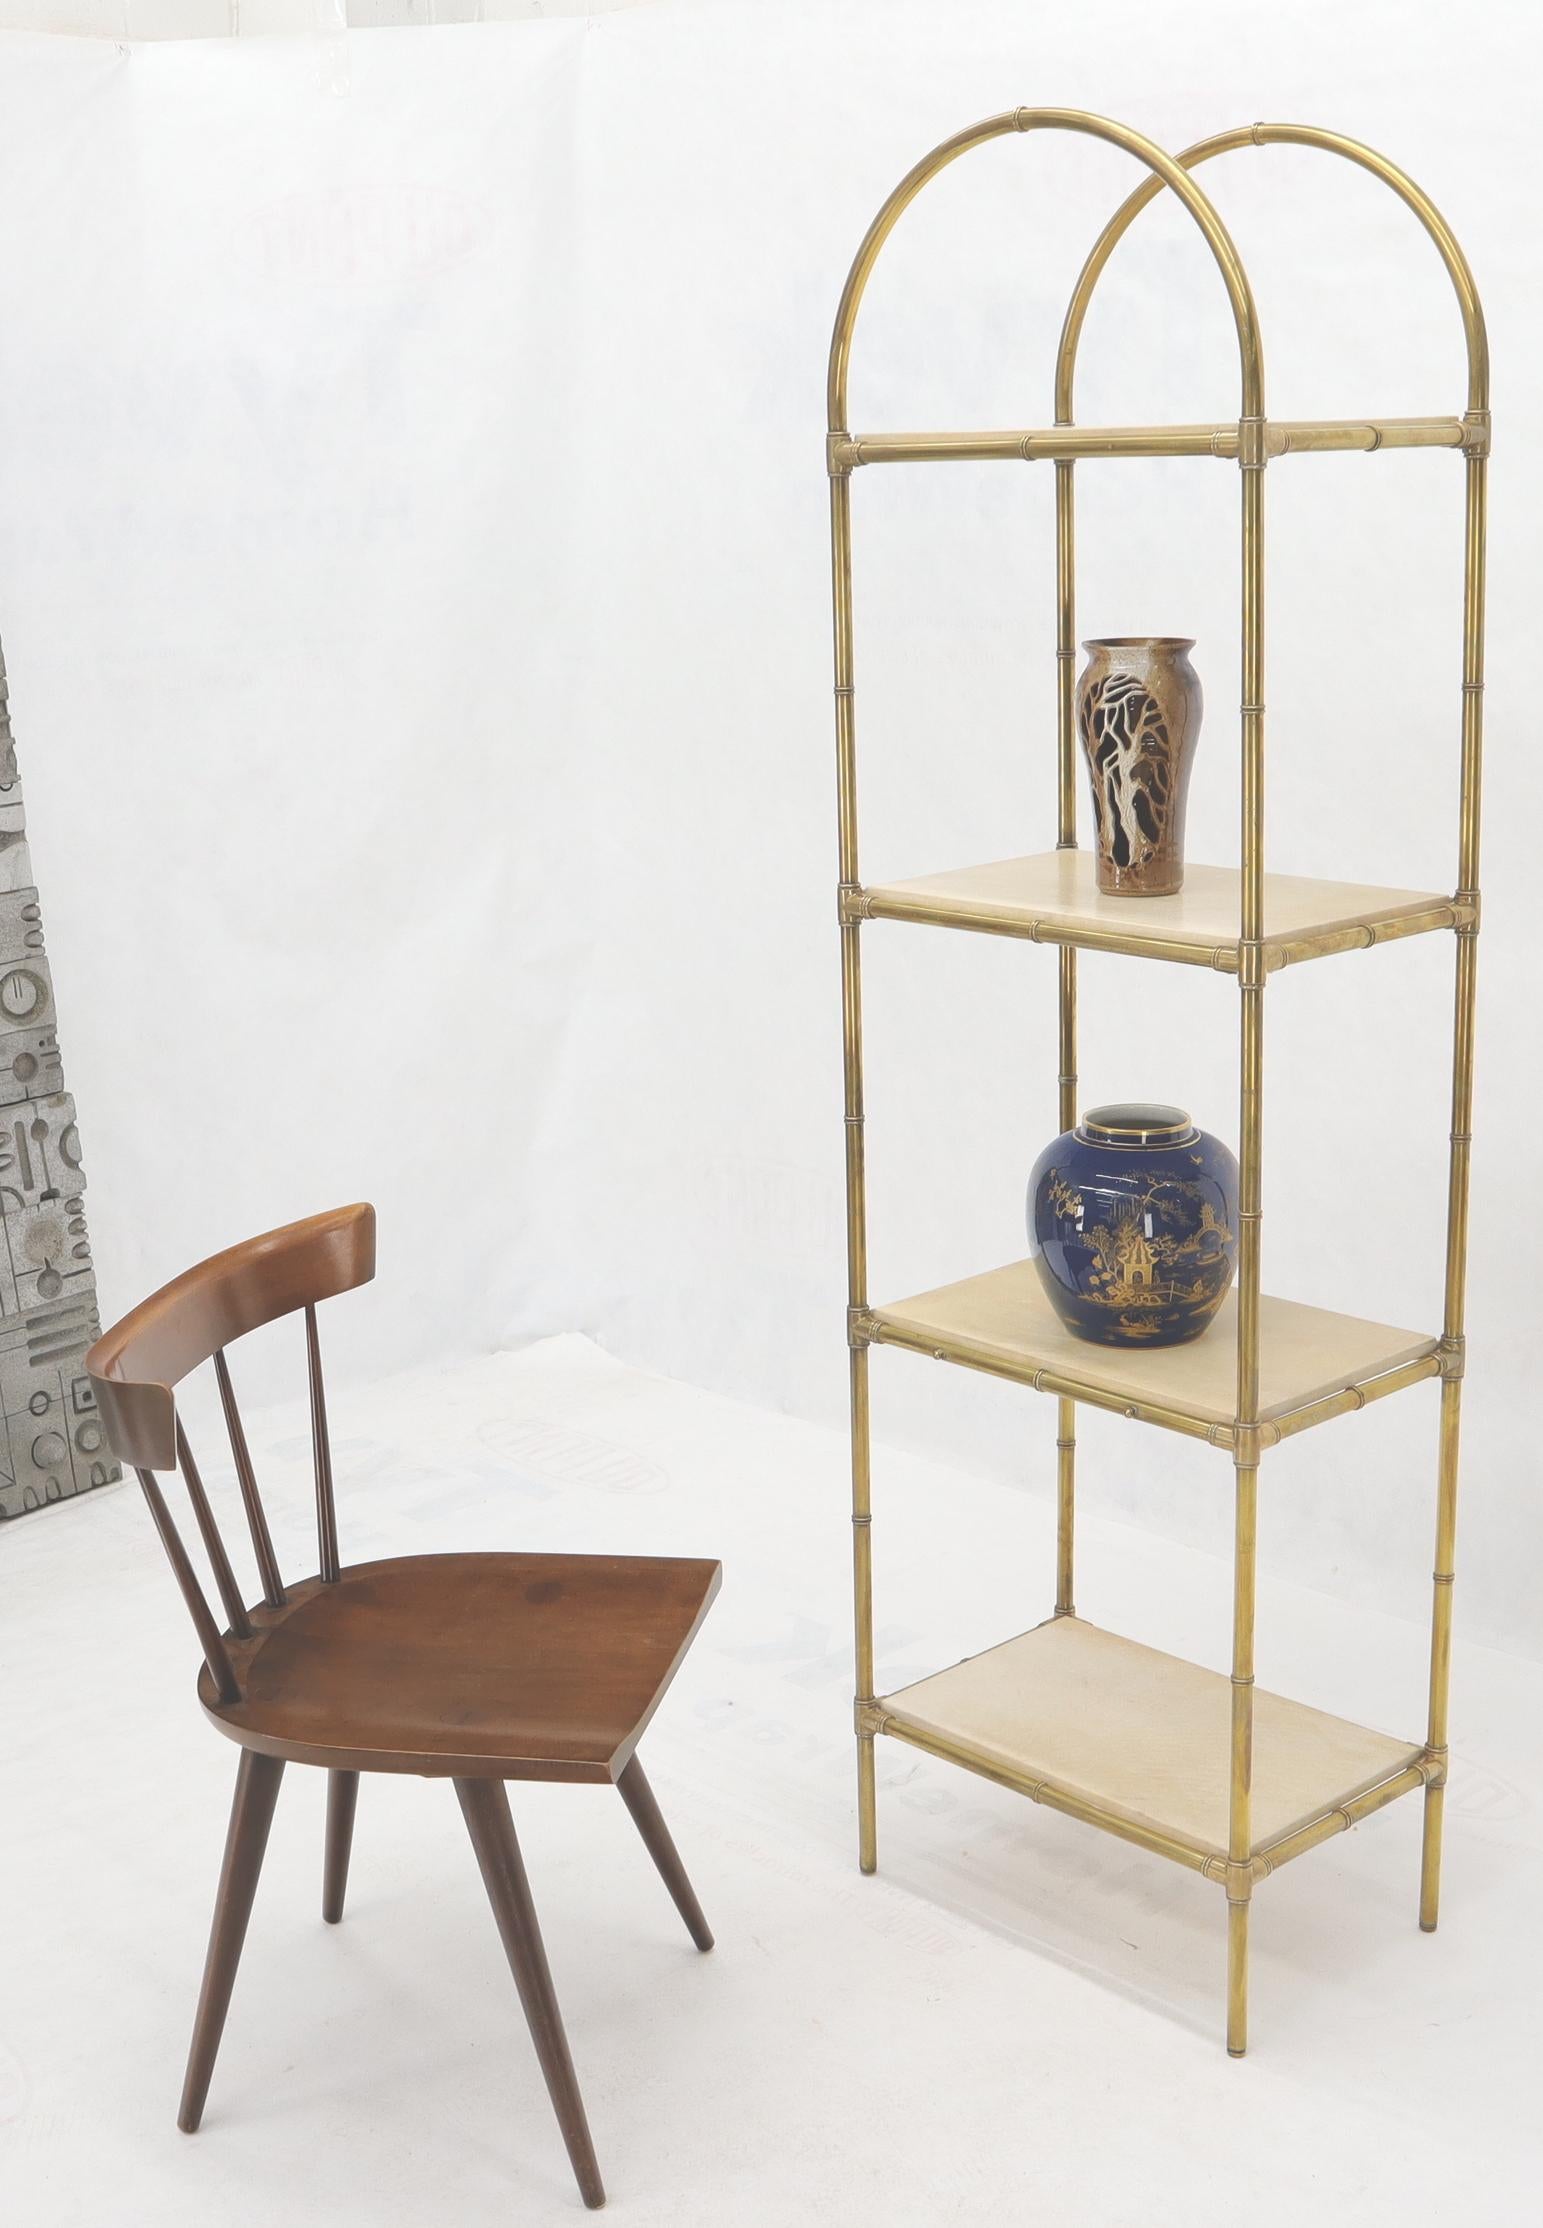 Pair of machined solid brass heavy tube faux bamboo 4 tier Italian Mid-Century Modern étagères shelves.
  